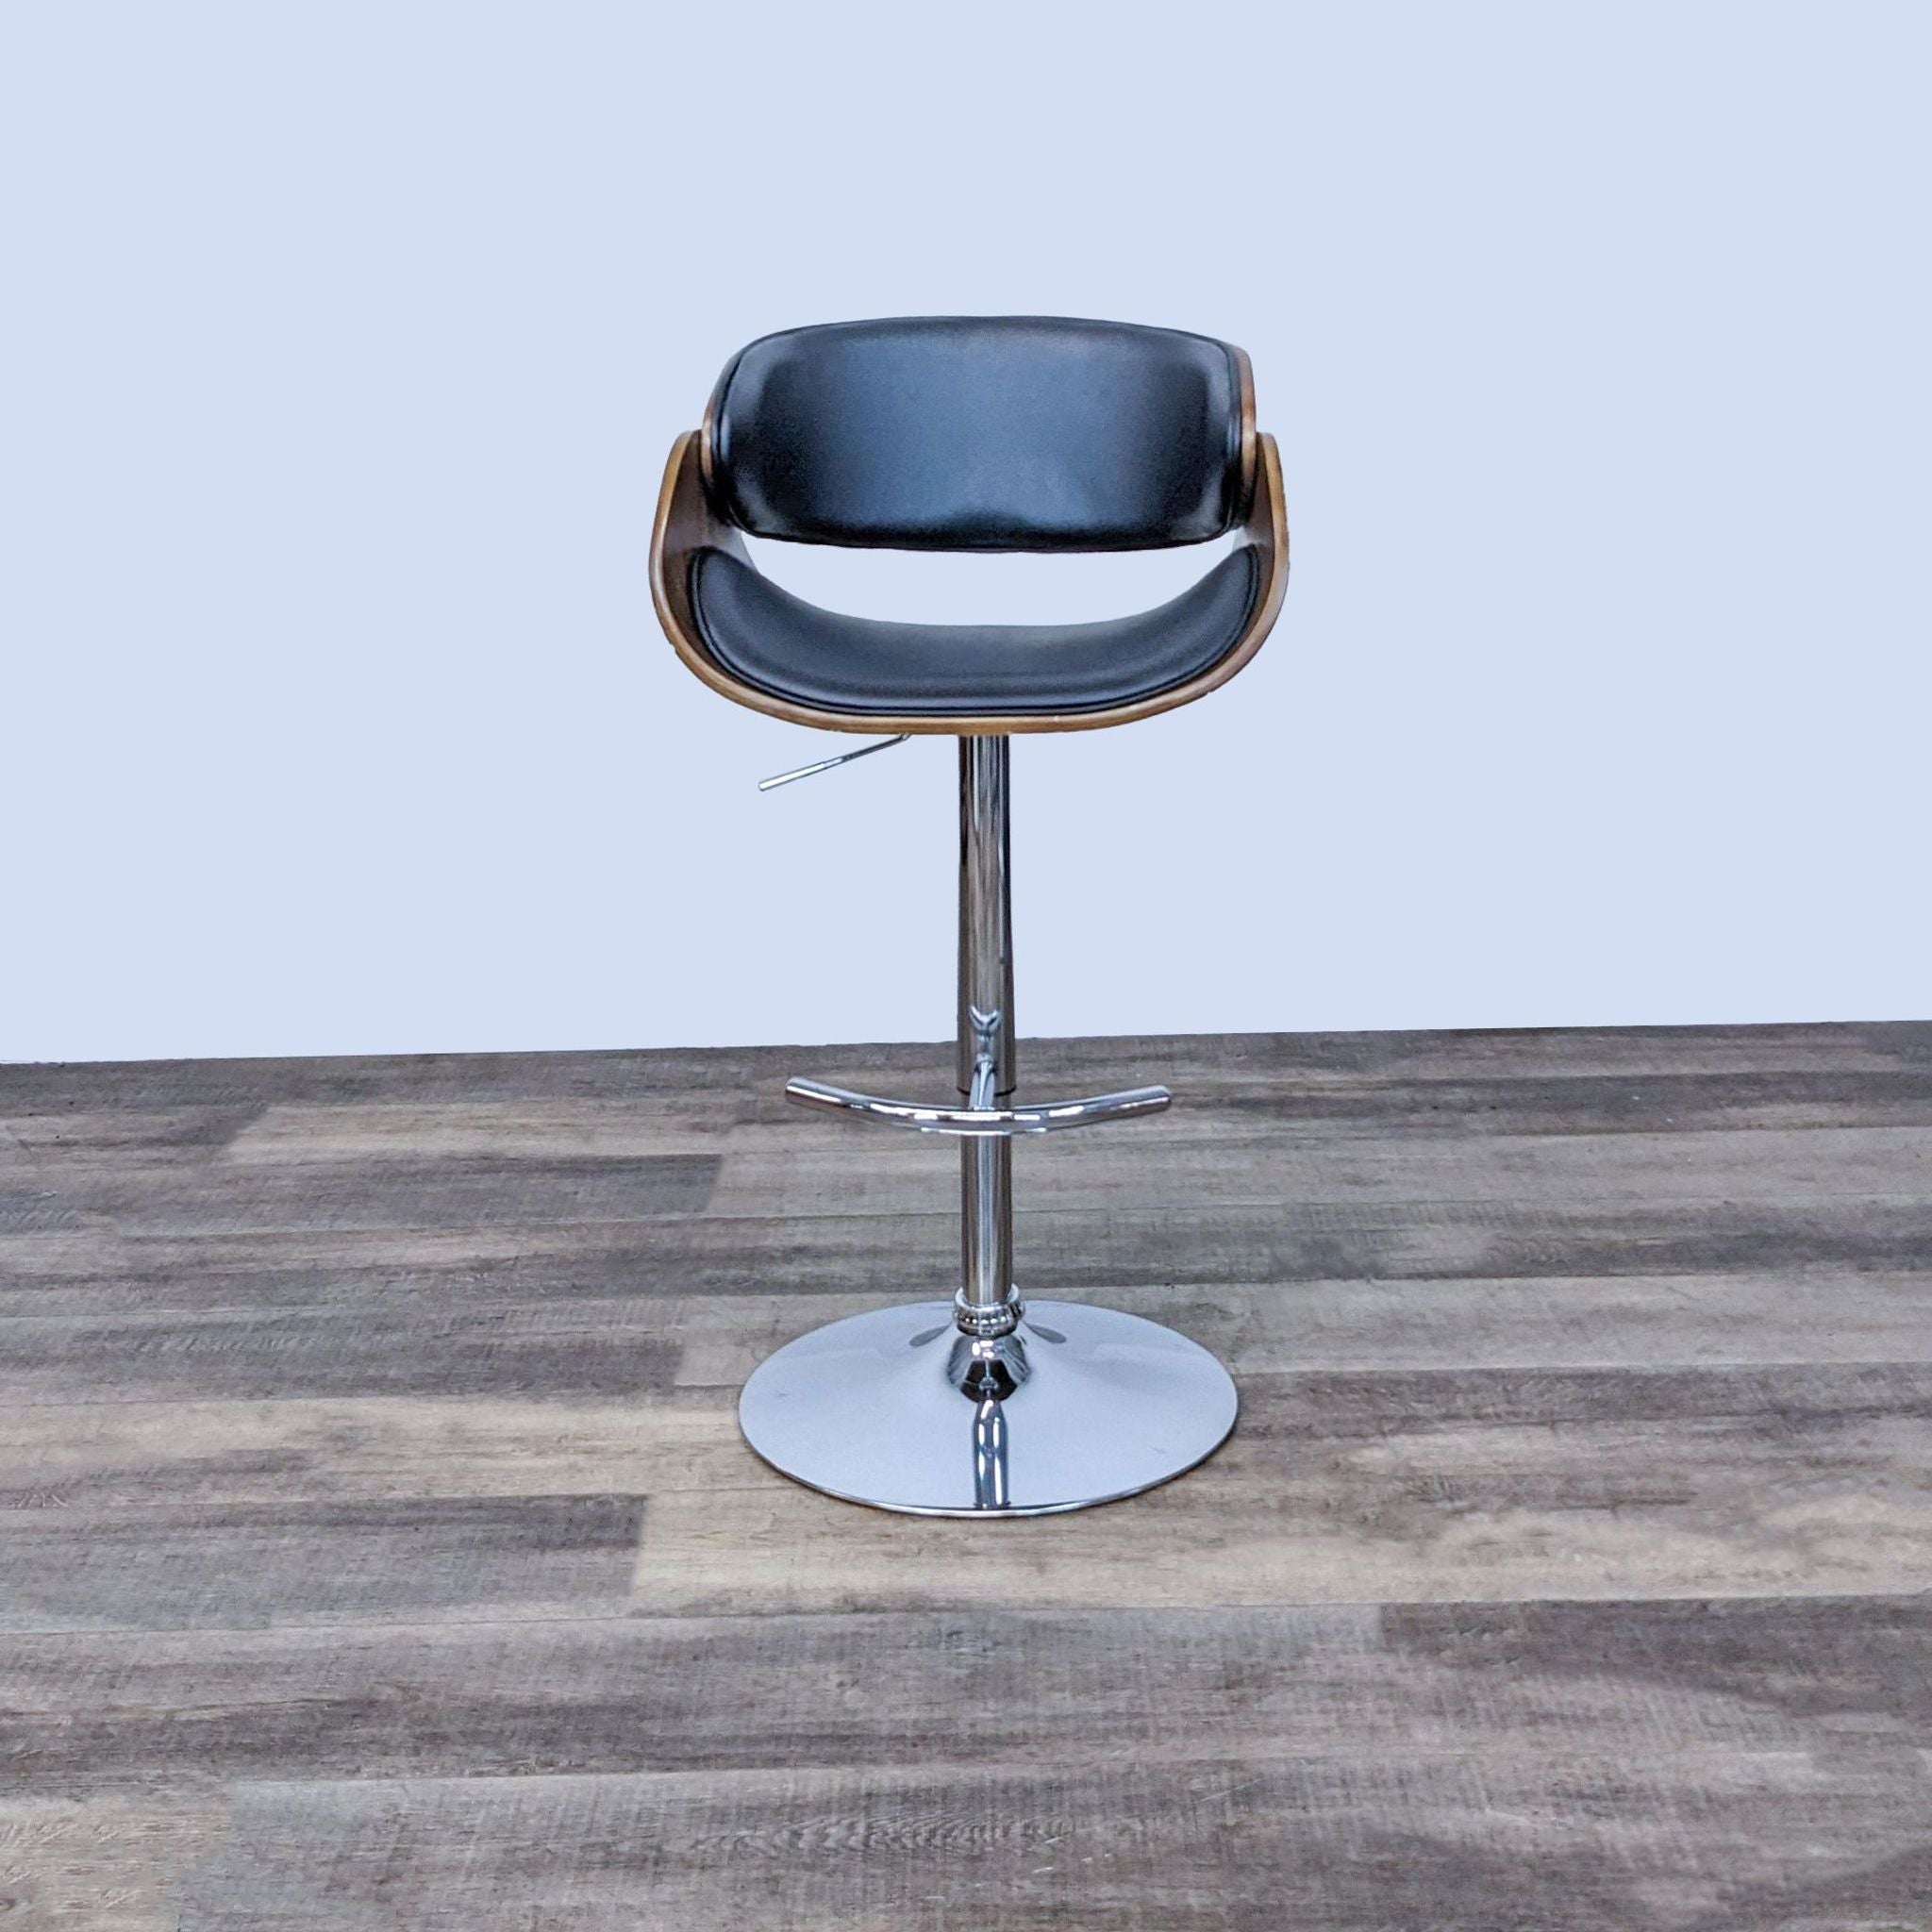 Reperch swivel stool with black seat, curved wooden back, and adjustable chrome base.